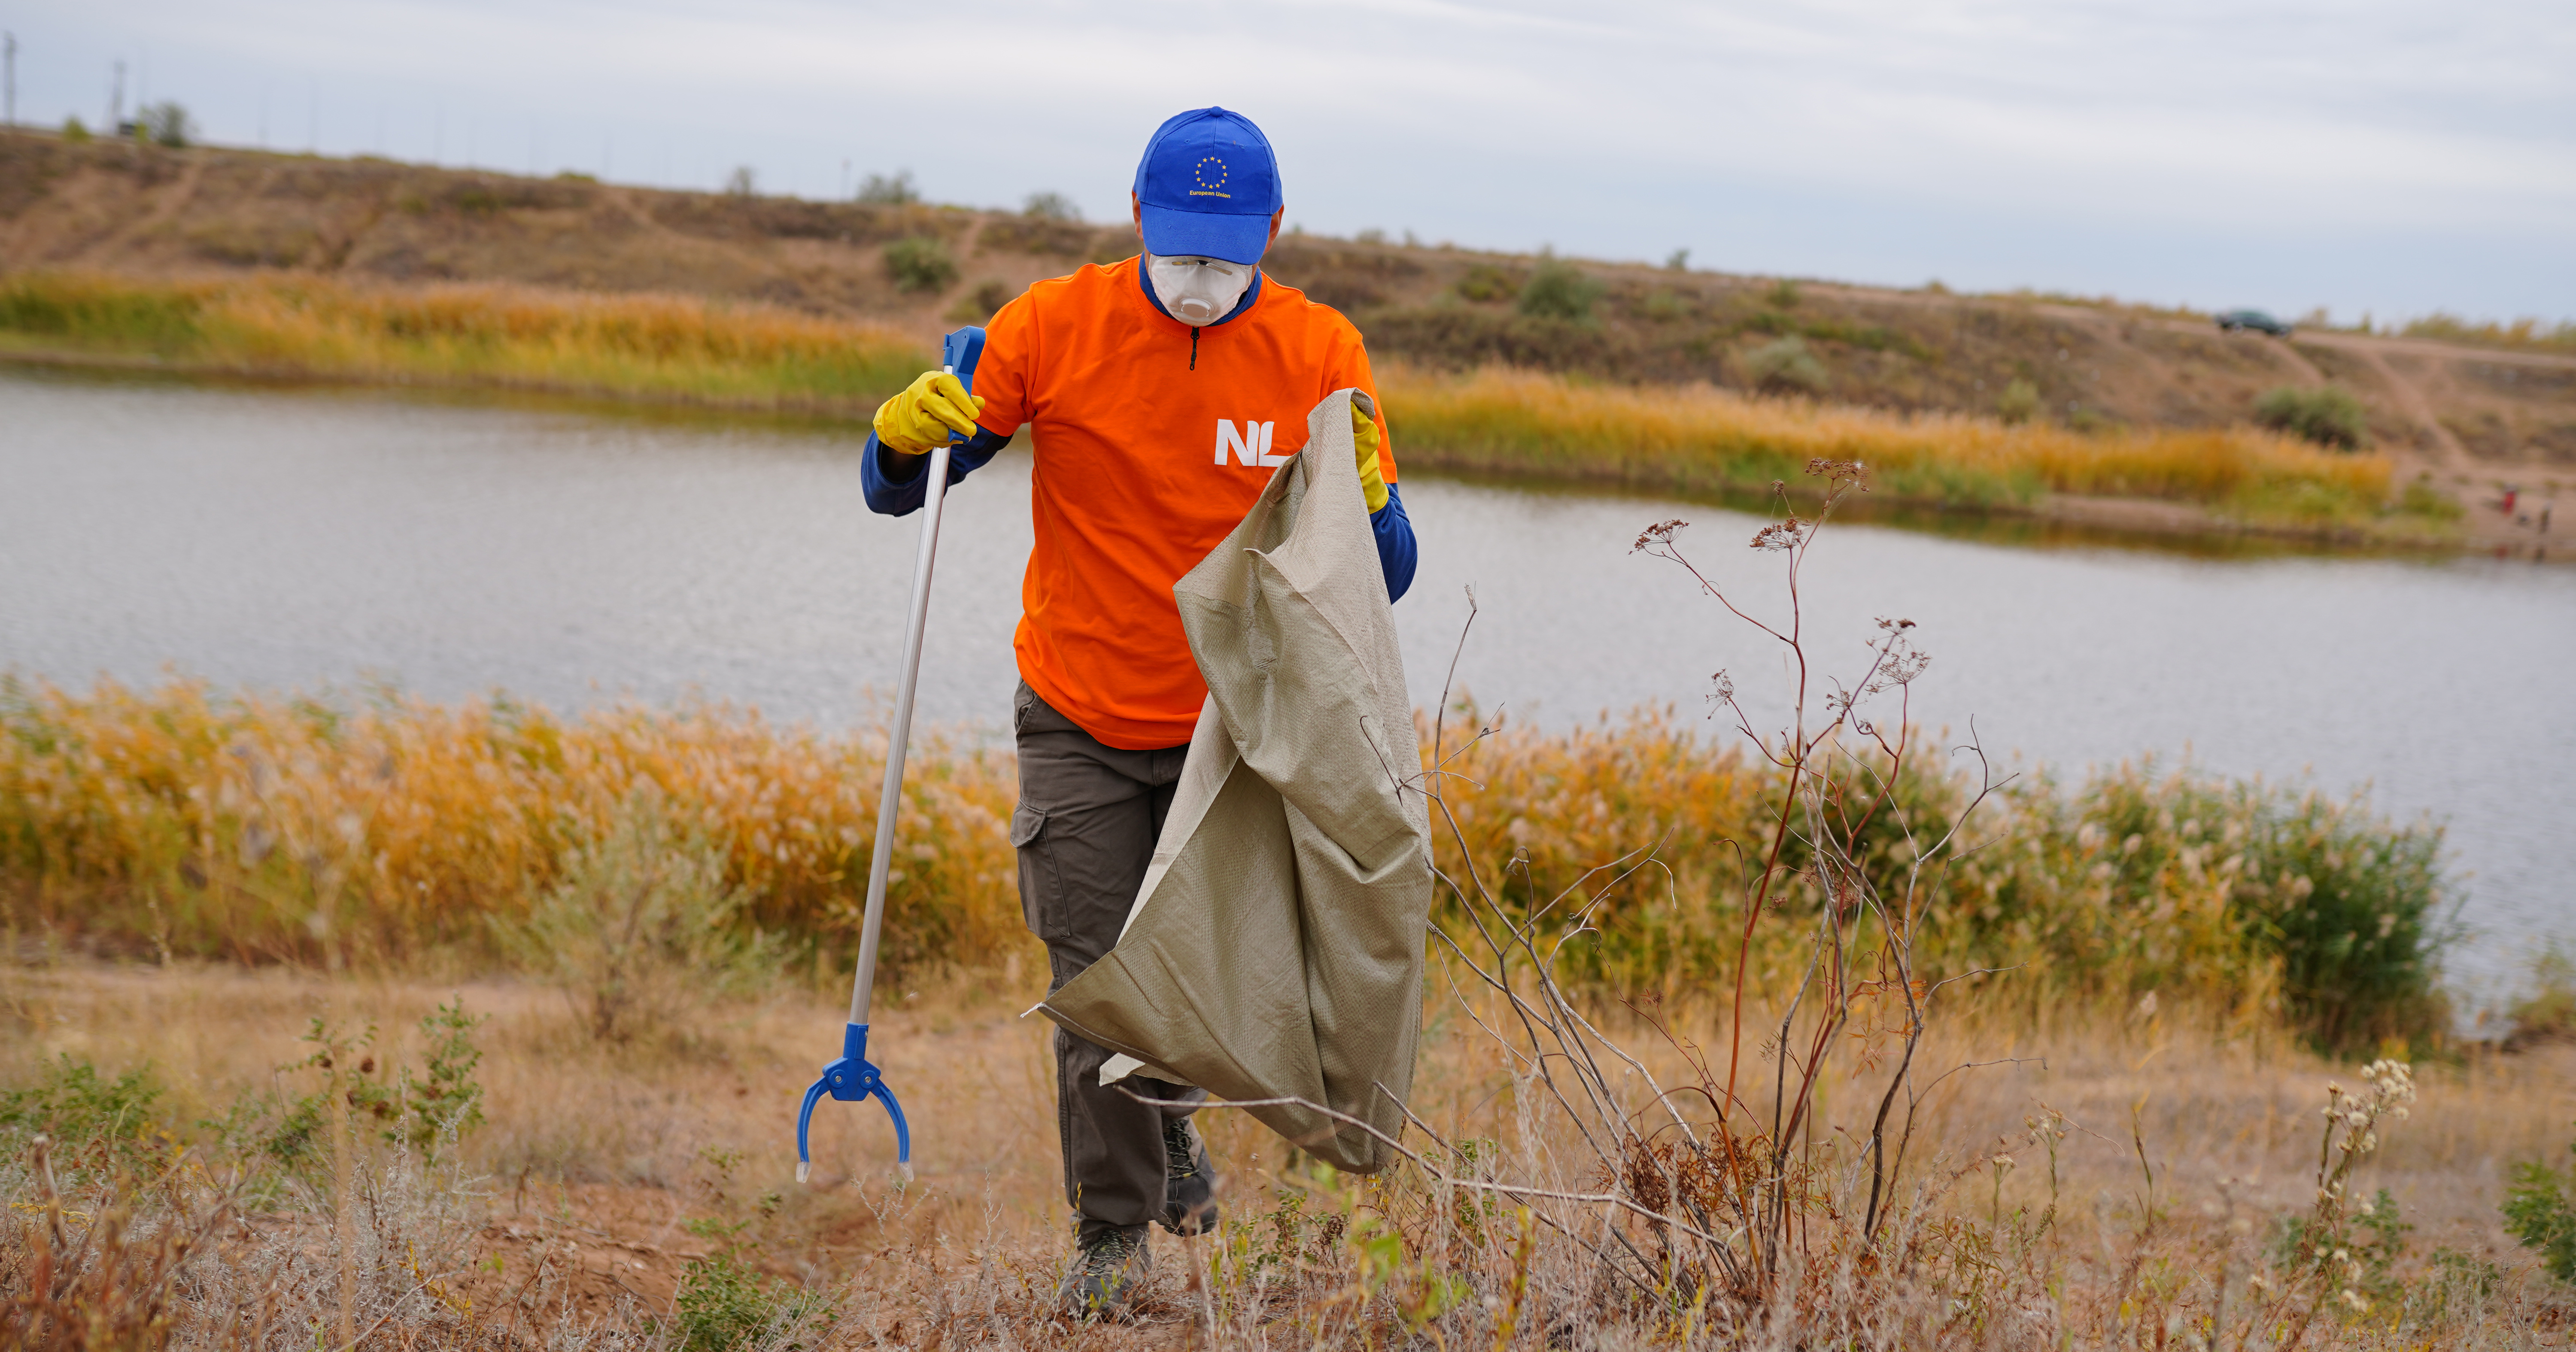 World Clean up Day event at the river Nura near the capital Astana, where the Dutch Embassy is located.